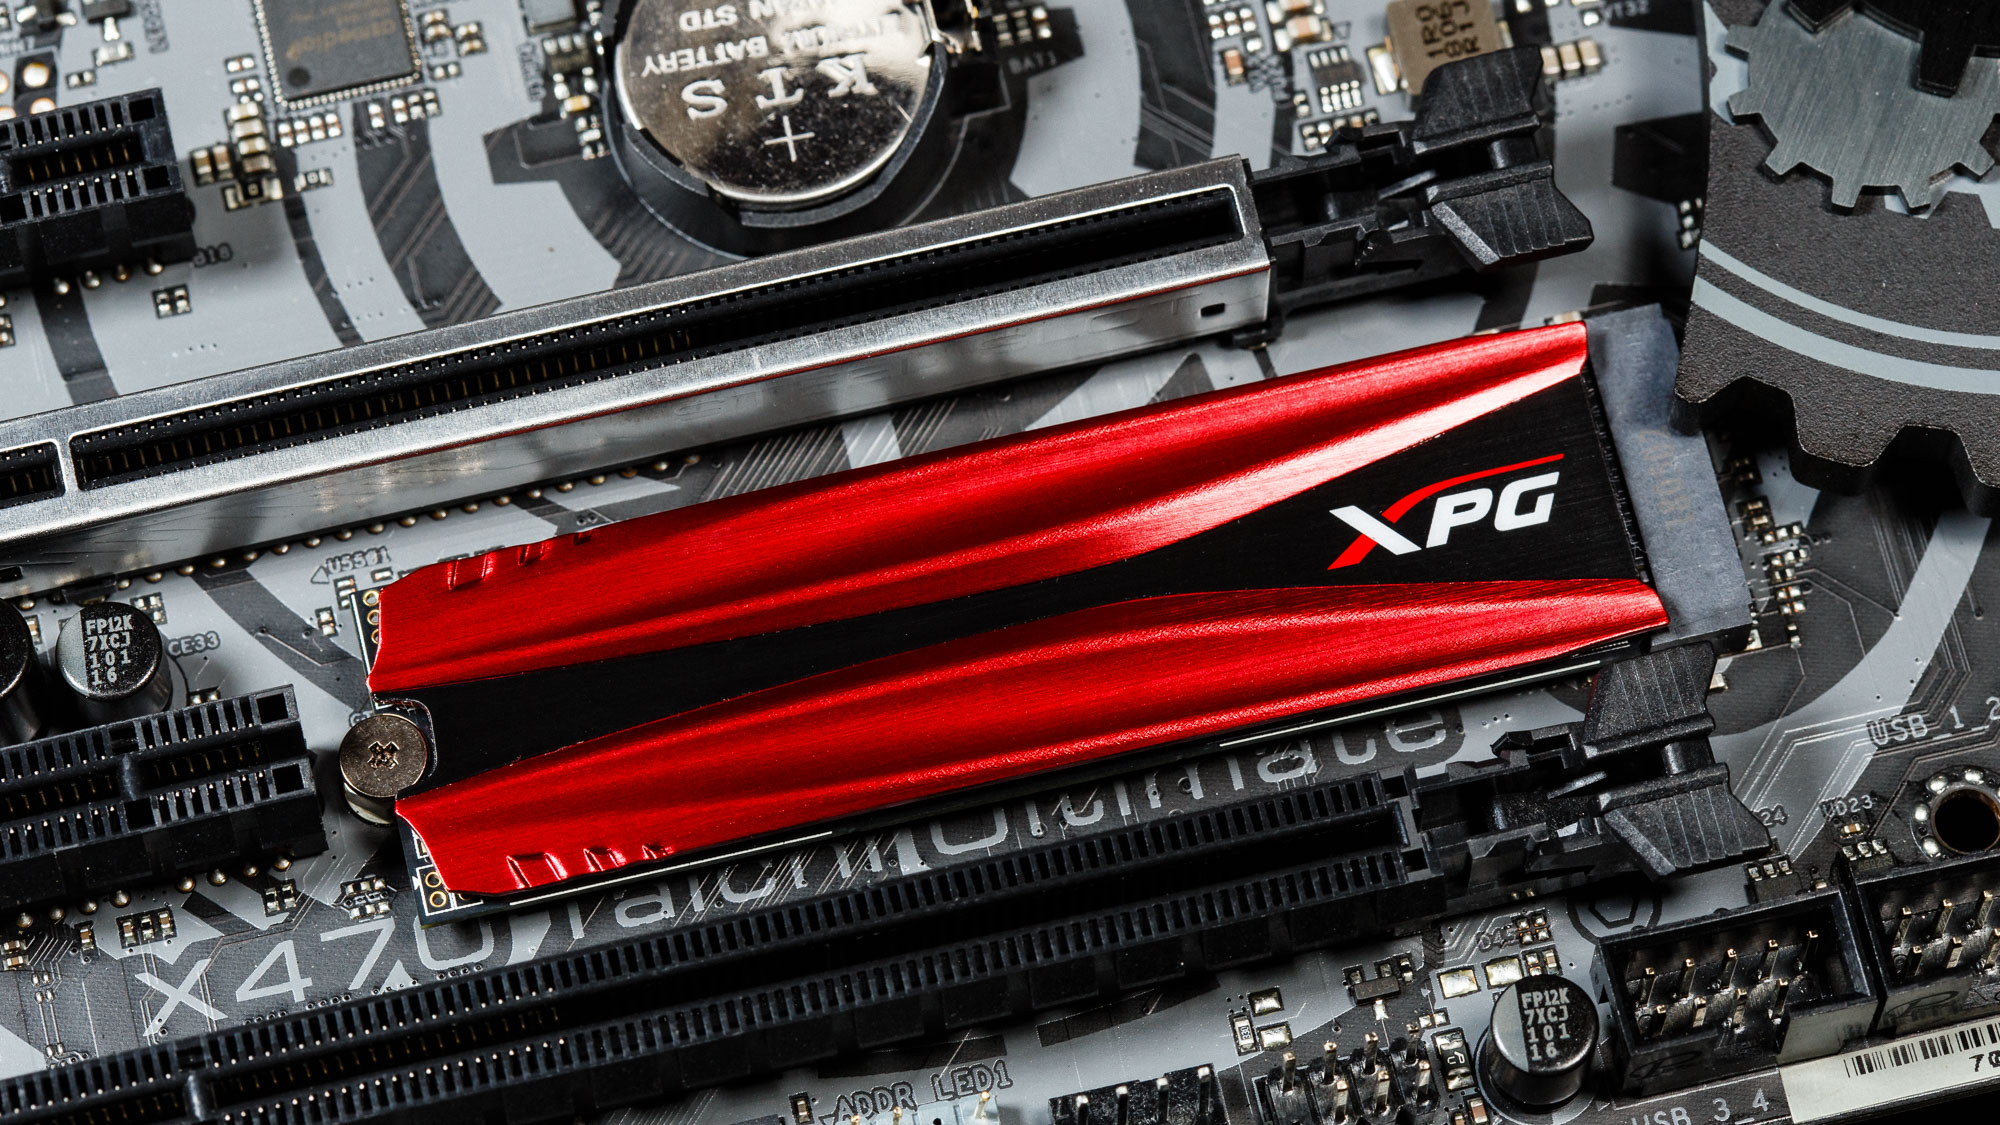 Pamphlet Entanglement disinfect Adata XPG Gammix S11 Pro M.2 NVMe SSD Review: Fast, Flashy and Affordable |  Tom's Hardware